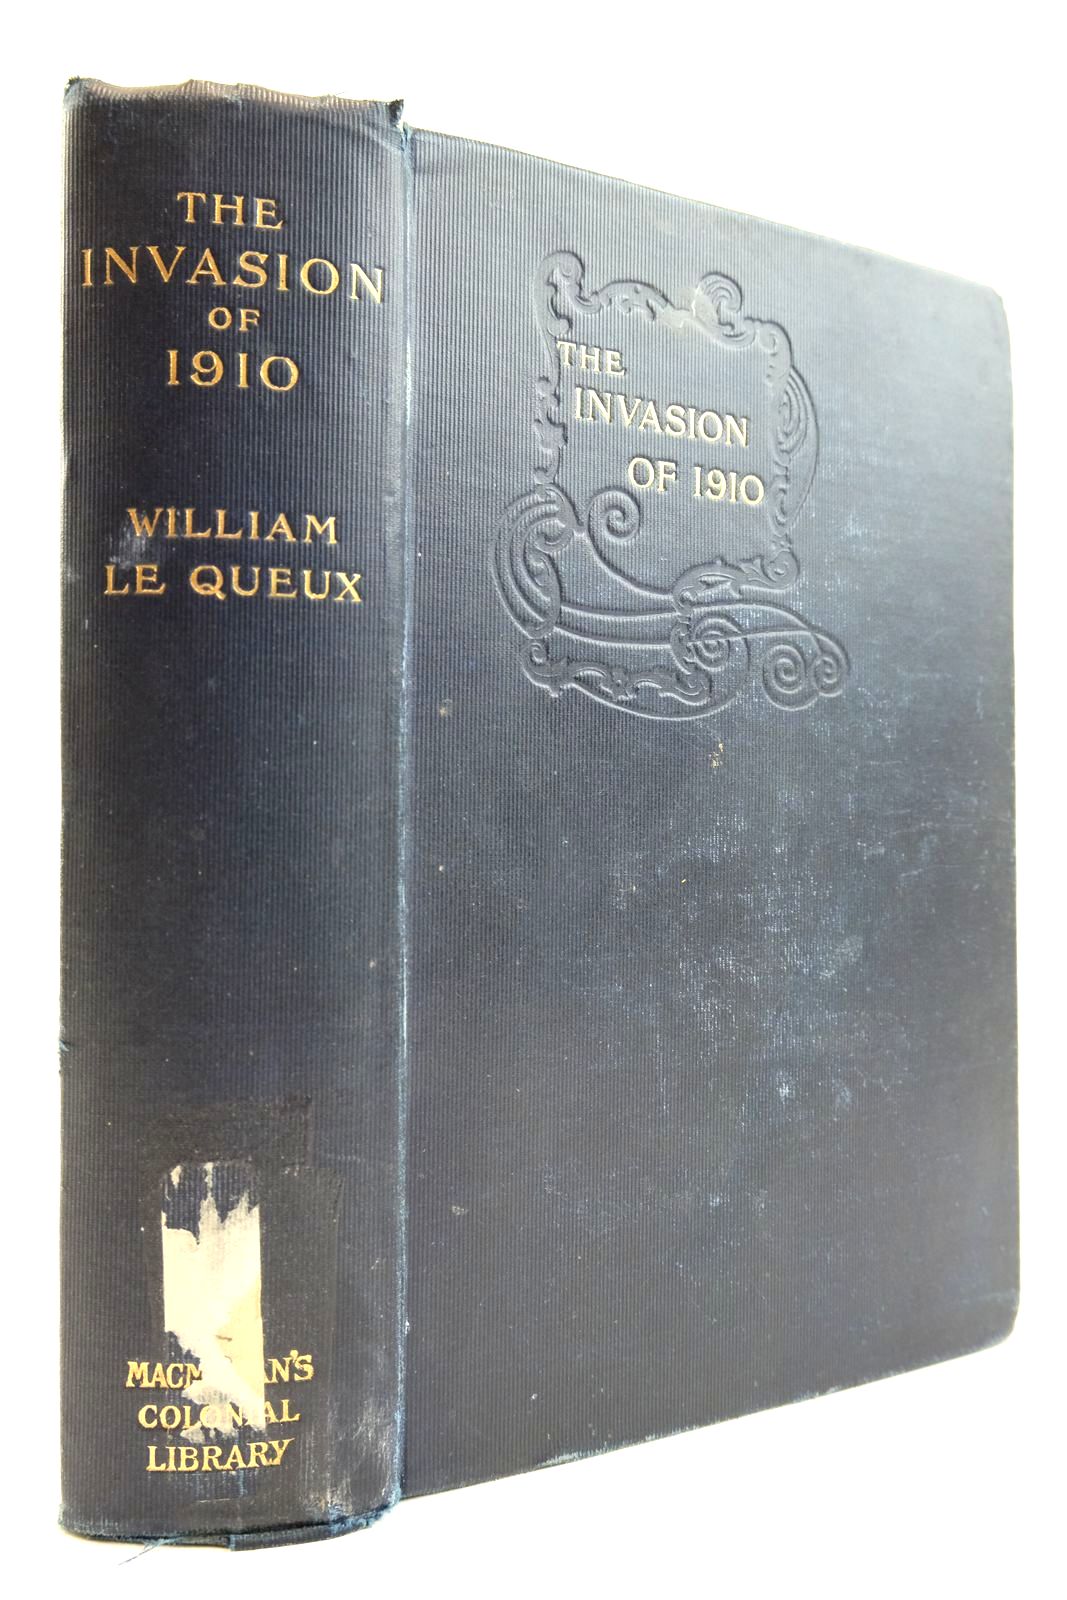 Photo of THE INVASION OF 1910 WITH A FULL ACCOUNT OF THE SIEGE OF LONDON written by Le Queux, William published by Macmillan &amp; Co. Ltd. (STOCK CODE: 2134006)  for sale by Stella & Rose's Books